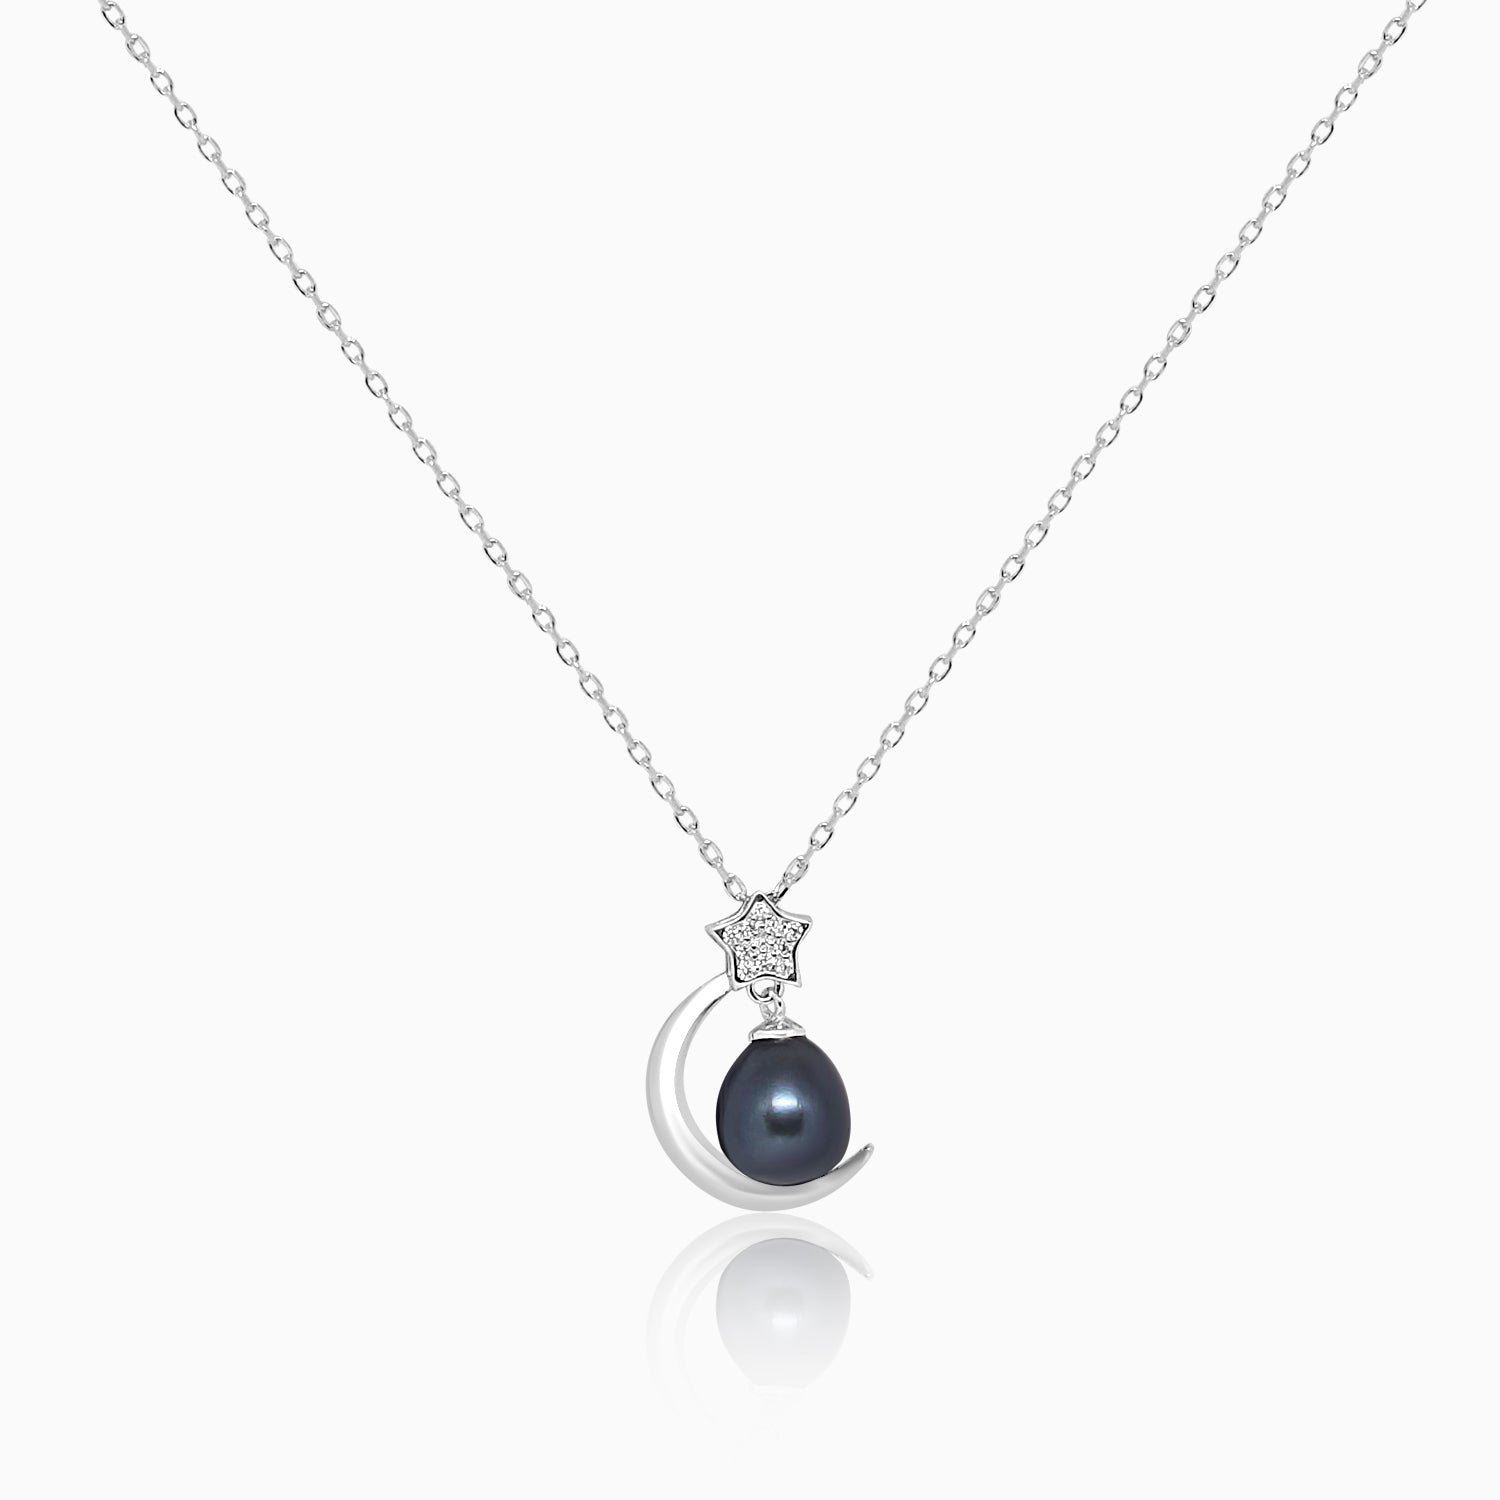 Silver Black Pearl Moon Star Necklace